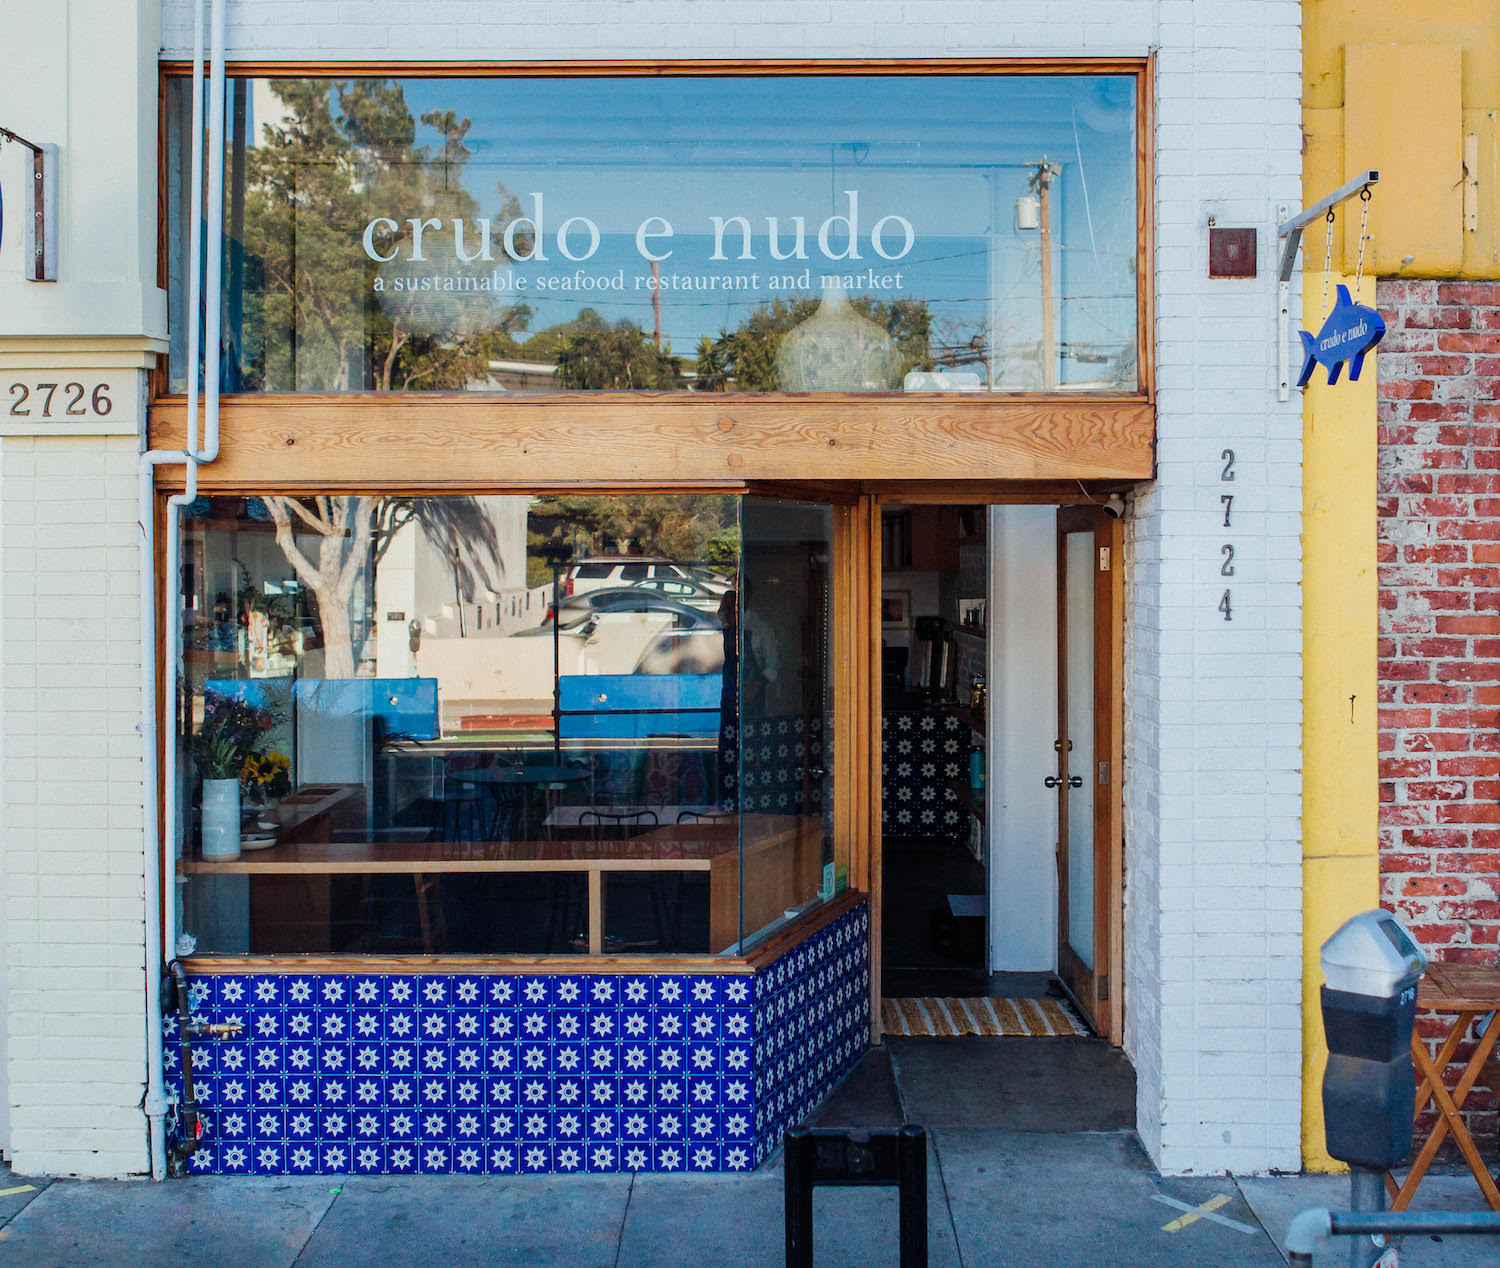 Exterior of Crudo E Nudo a sustainable seafood restaurant and market in Santa Monica, Ca. June 2021